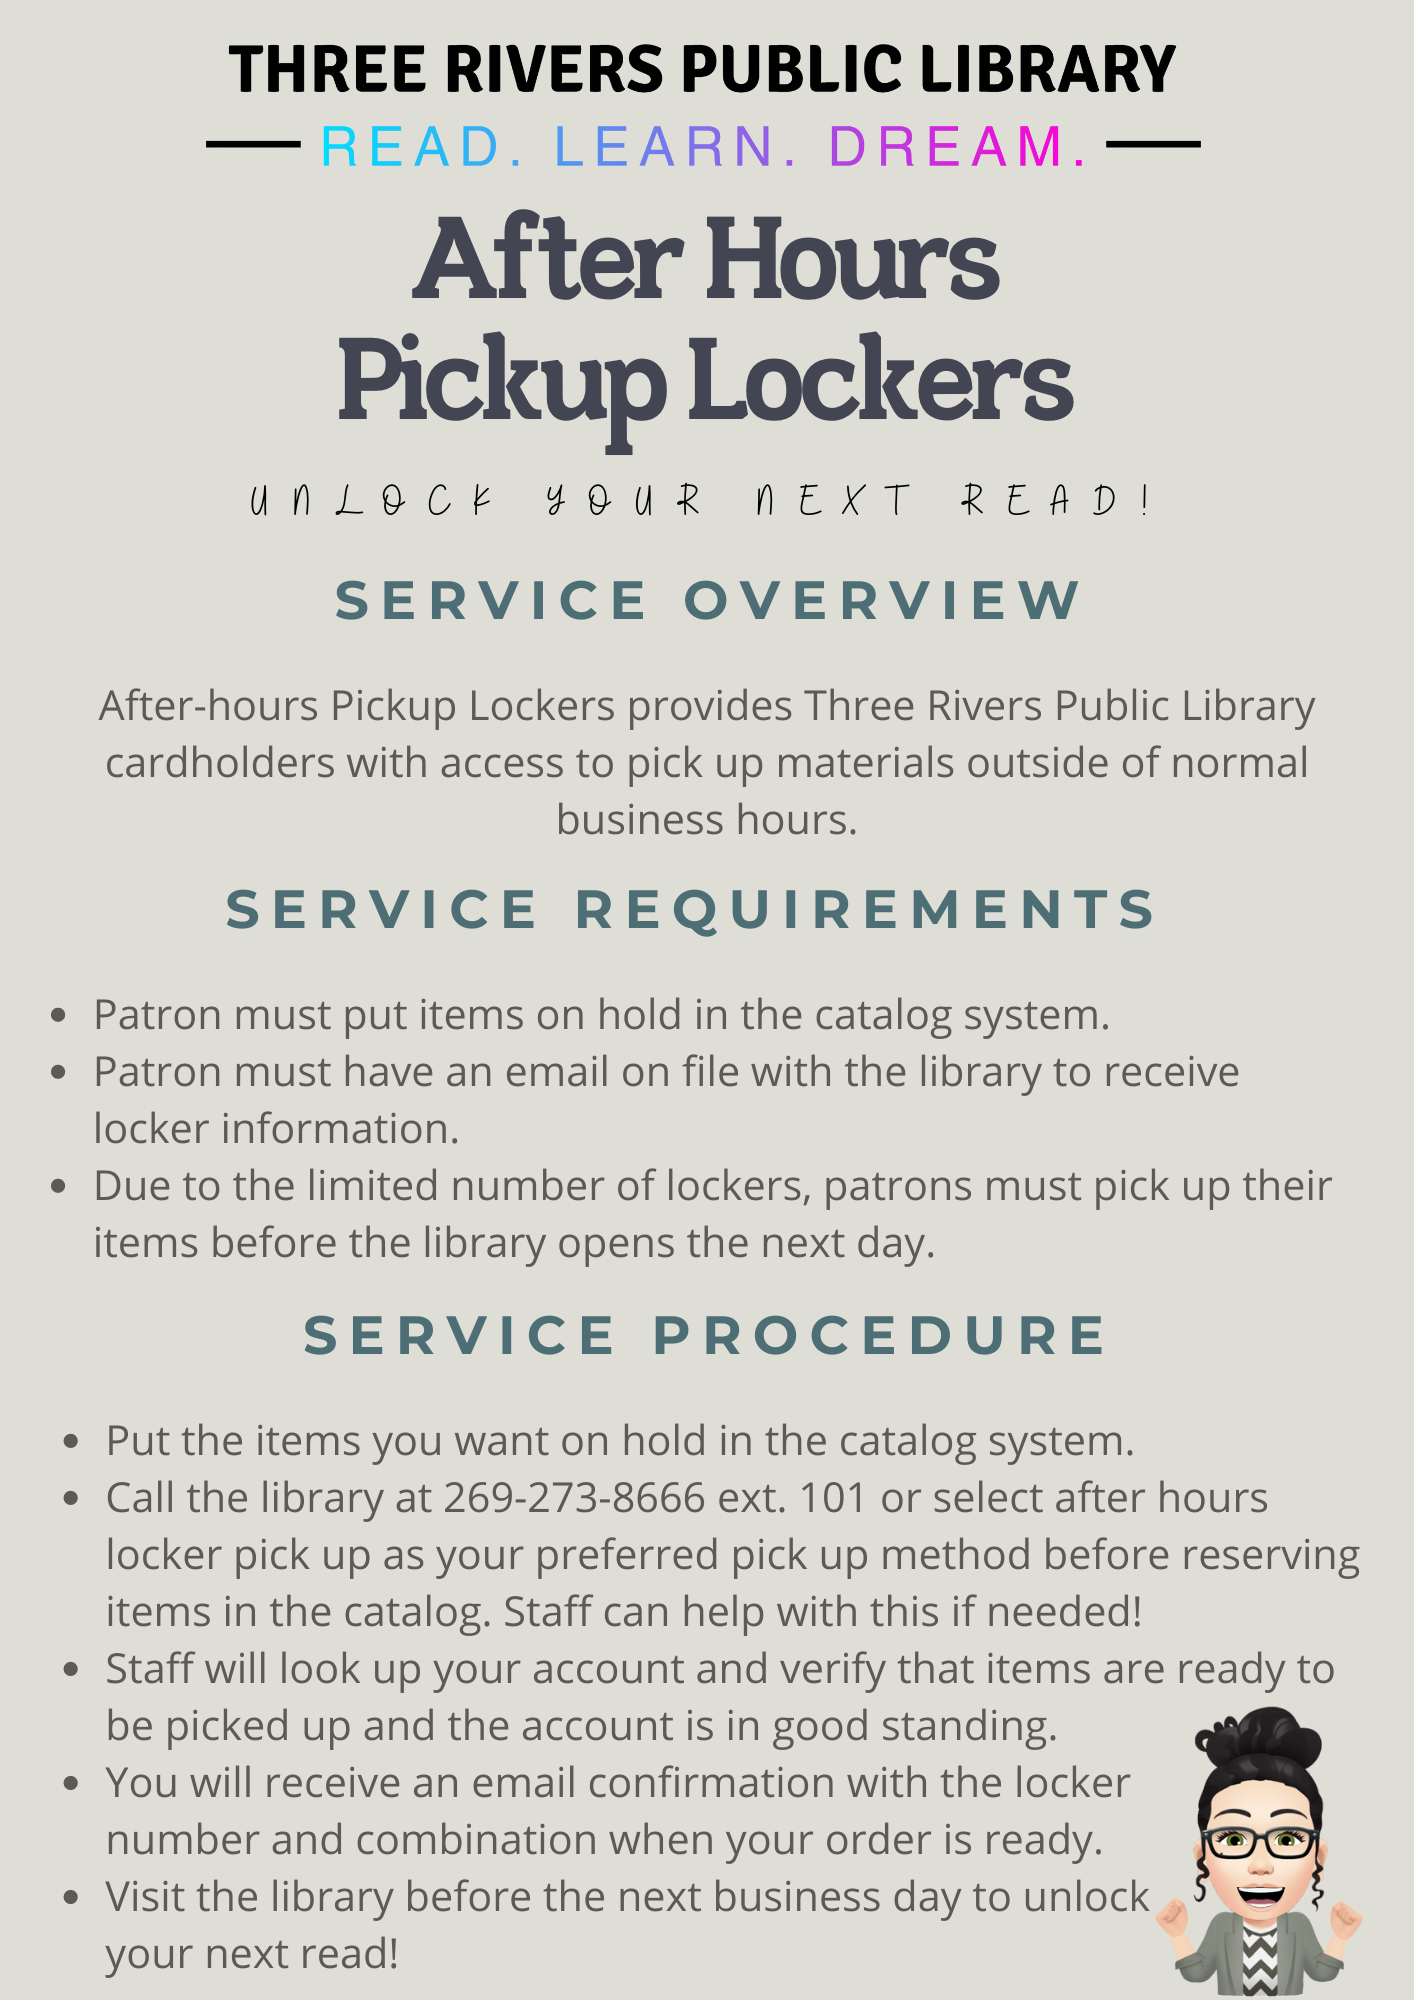 After Hours Pickup Lockers (1).png